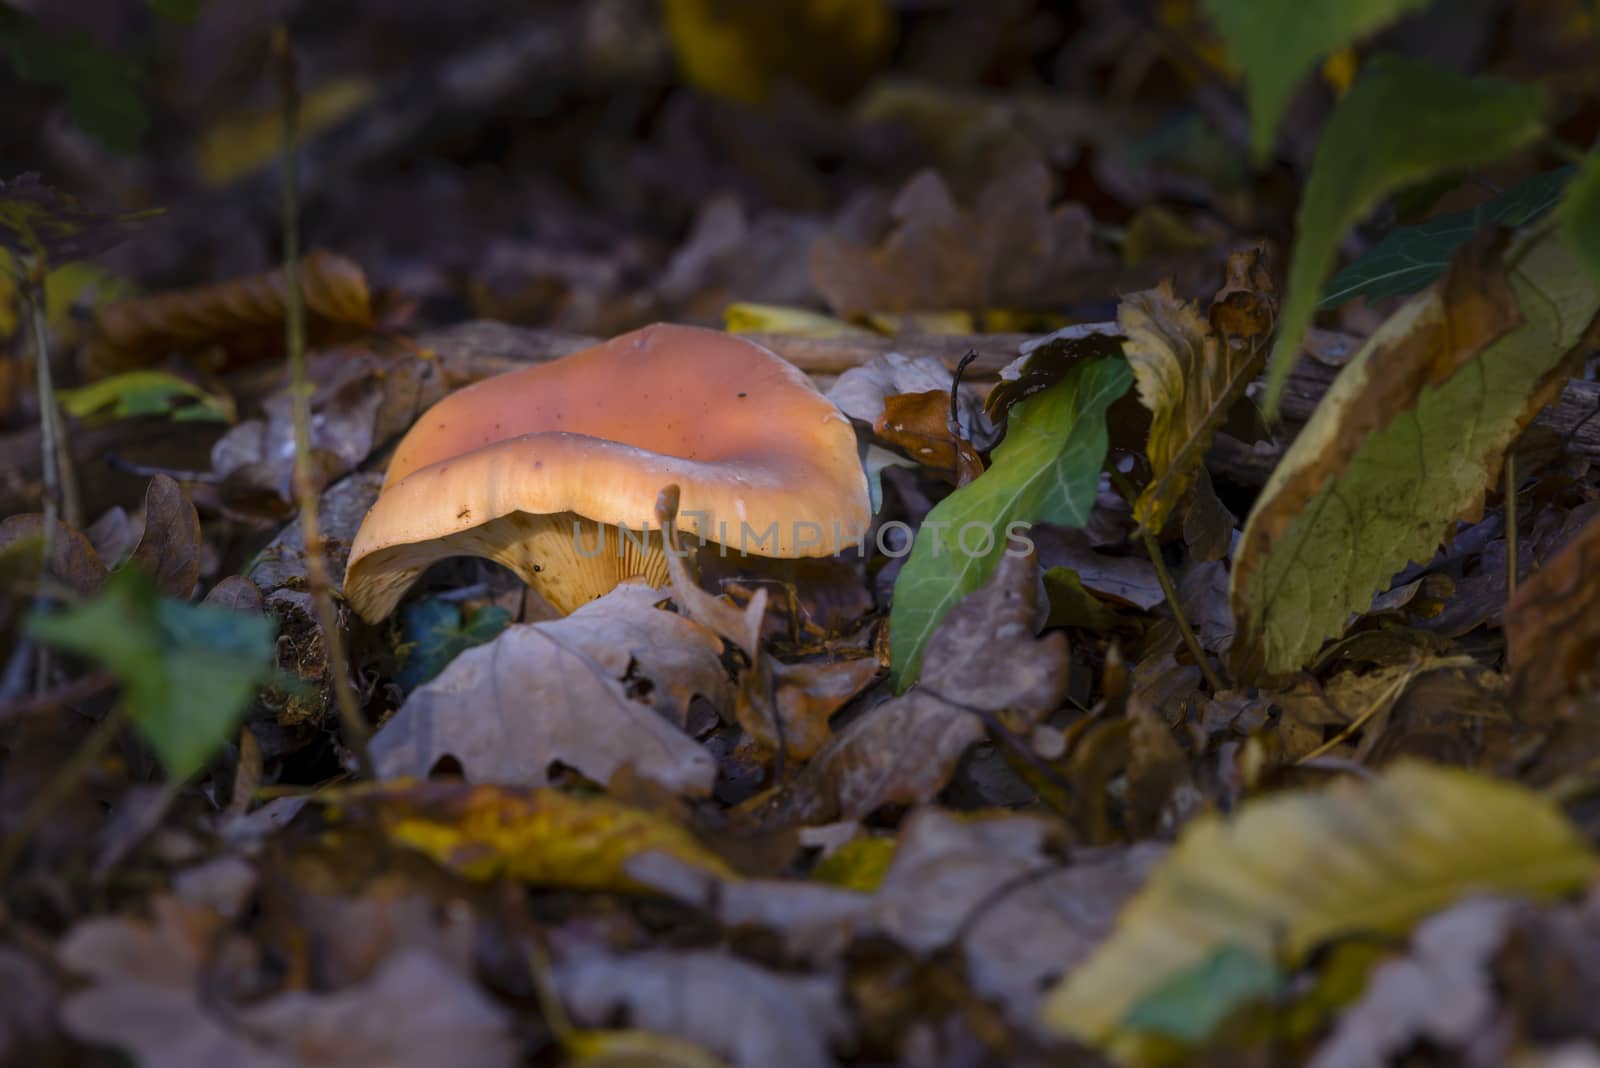 Mushroom in woods in autumn foliage on forest ground